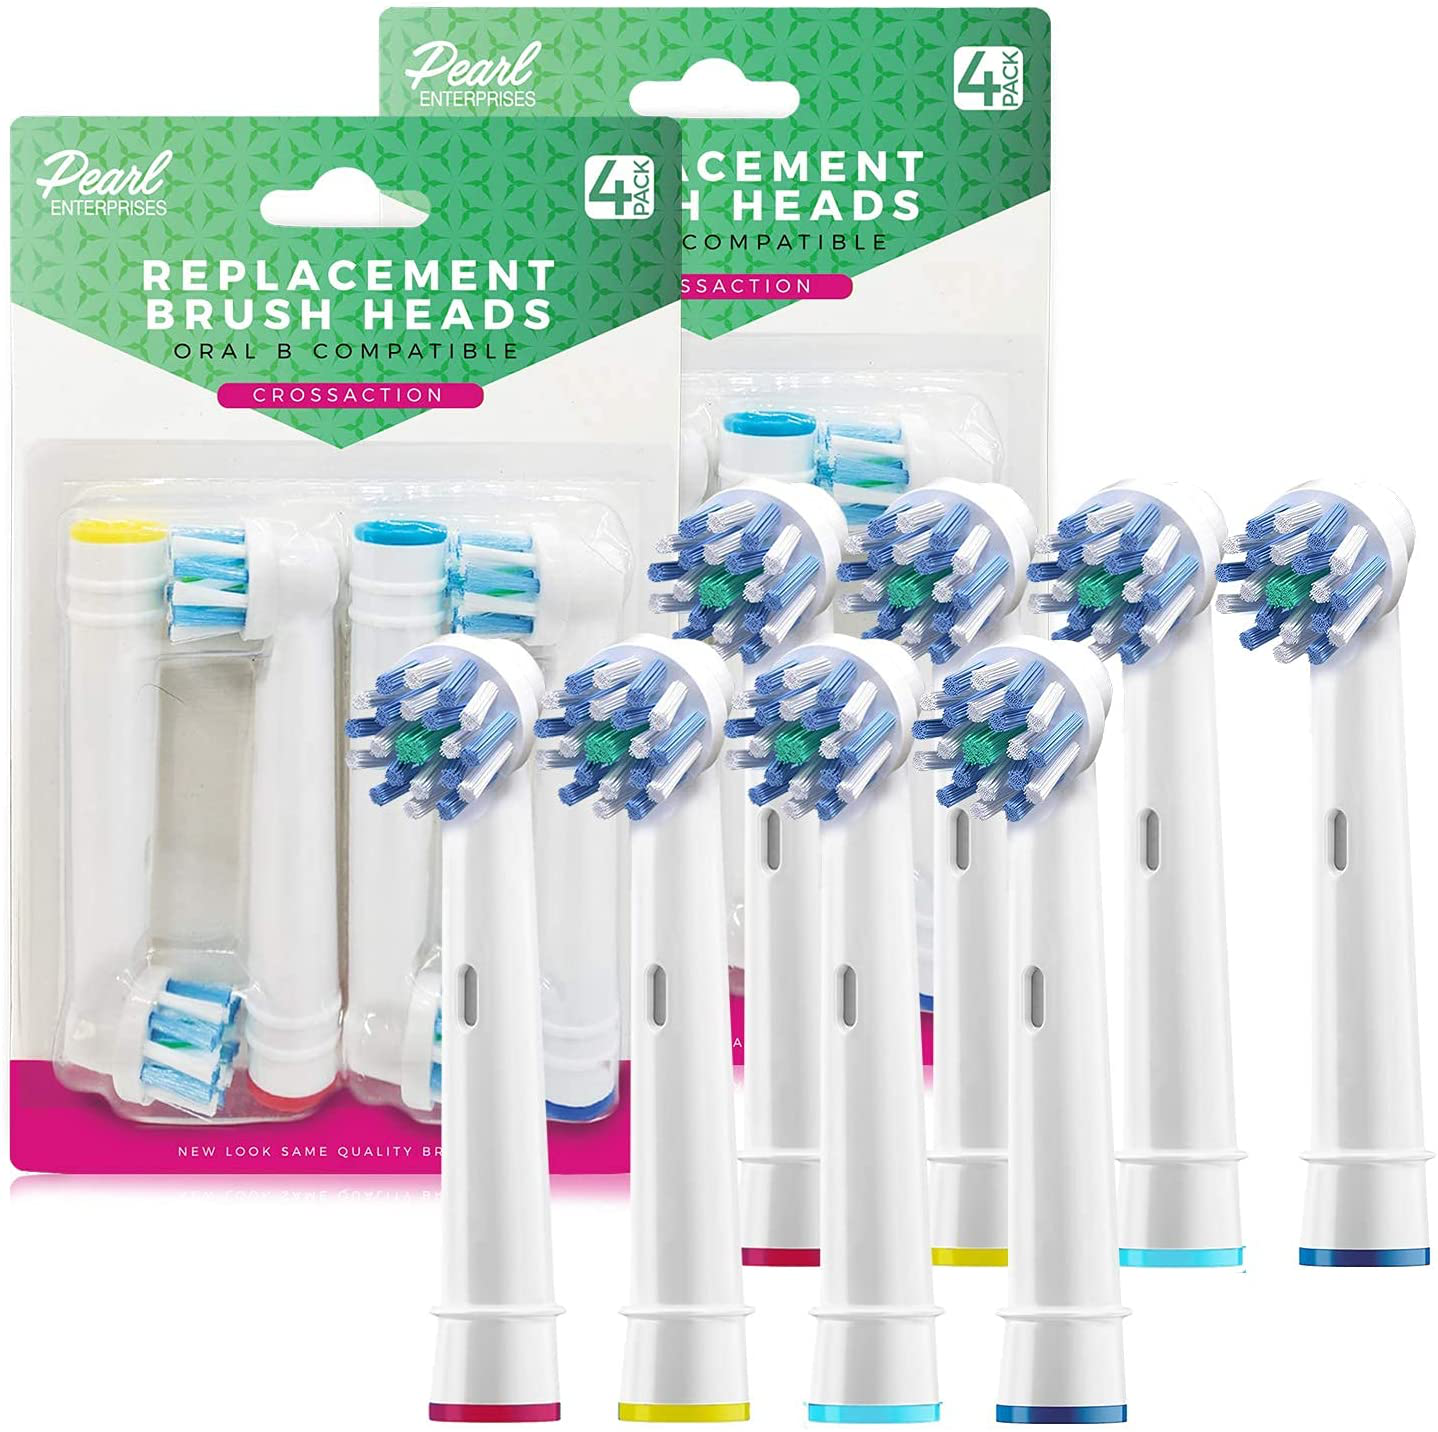 Replacement Brush Heads Compatible With Oral B Braun Electric Toothbrush-Fits Oral-b Pro 1000, Vitality, Triumph, Kids + More!